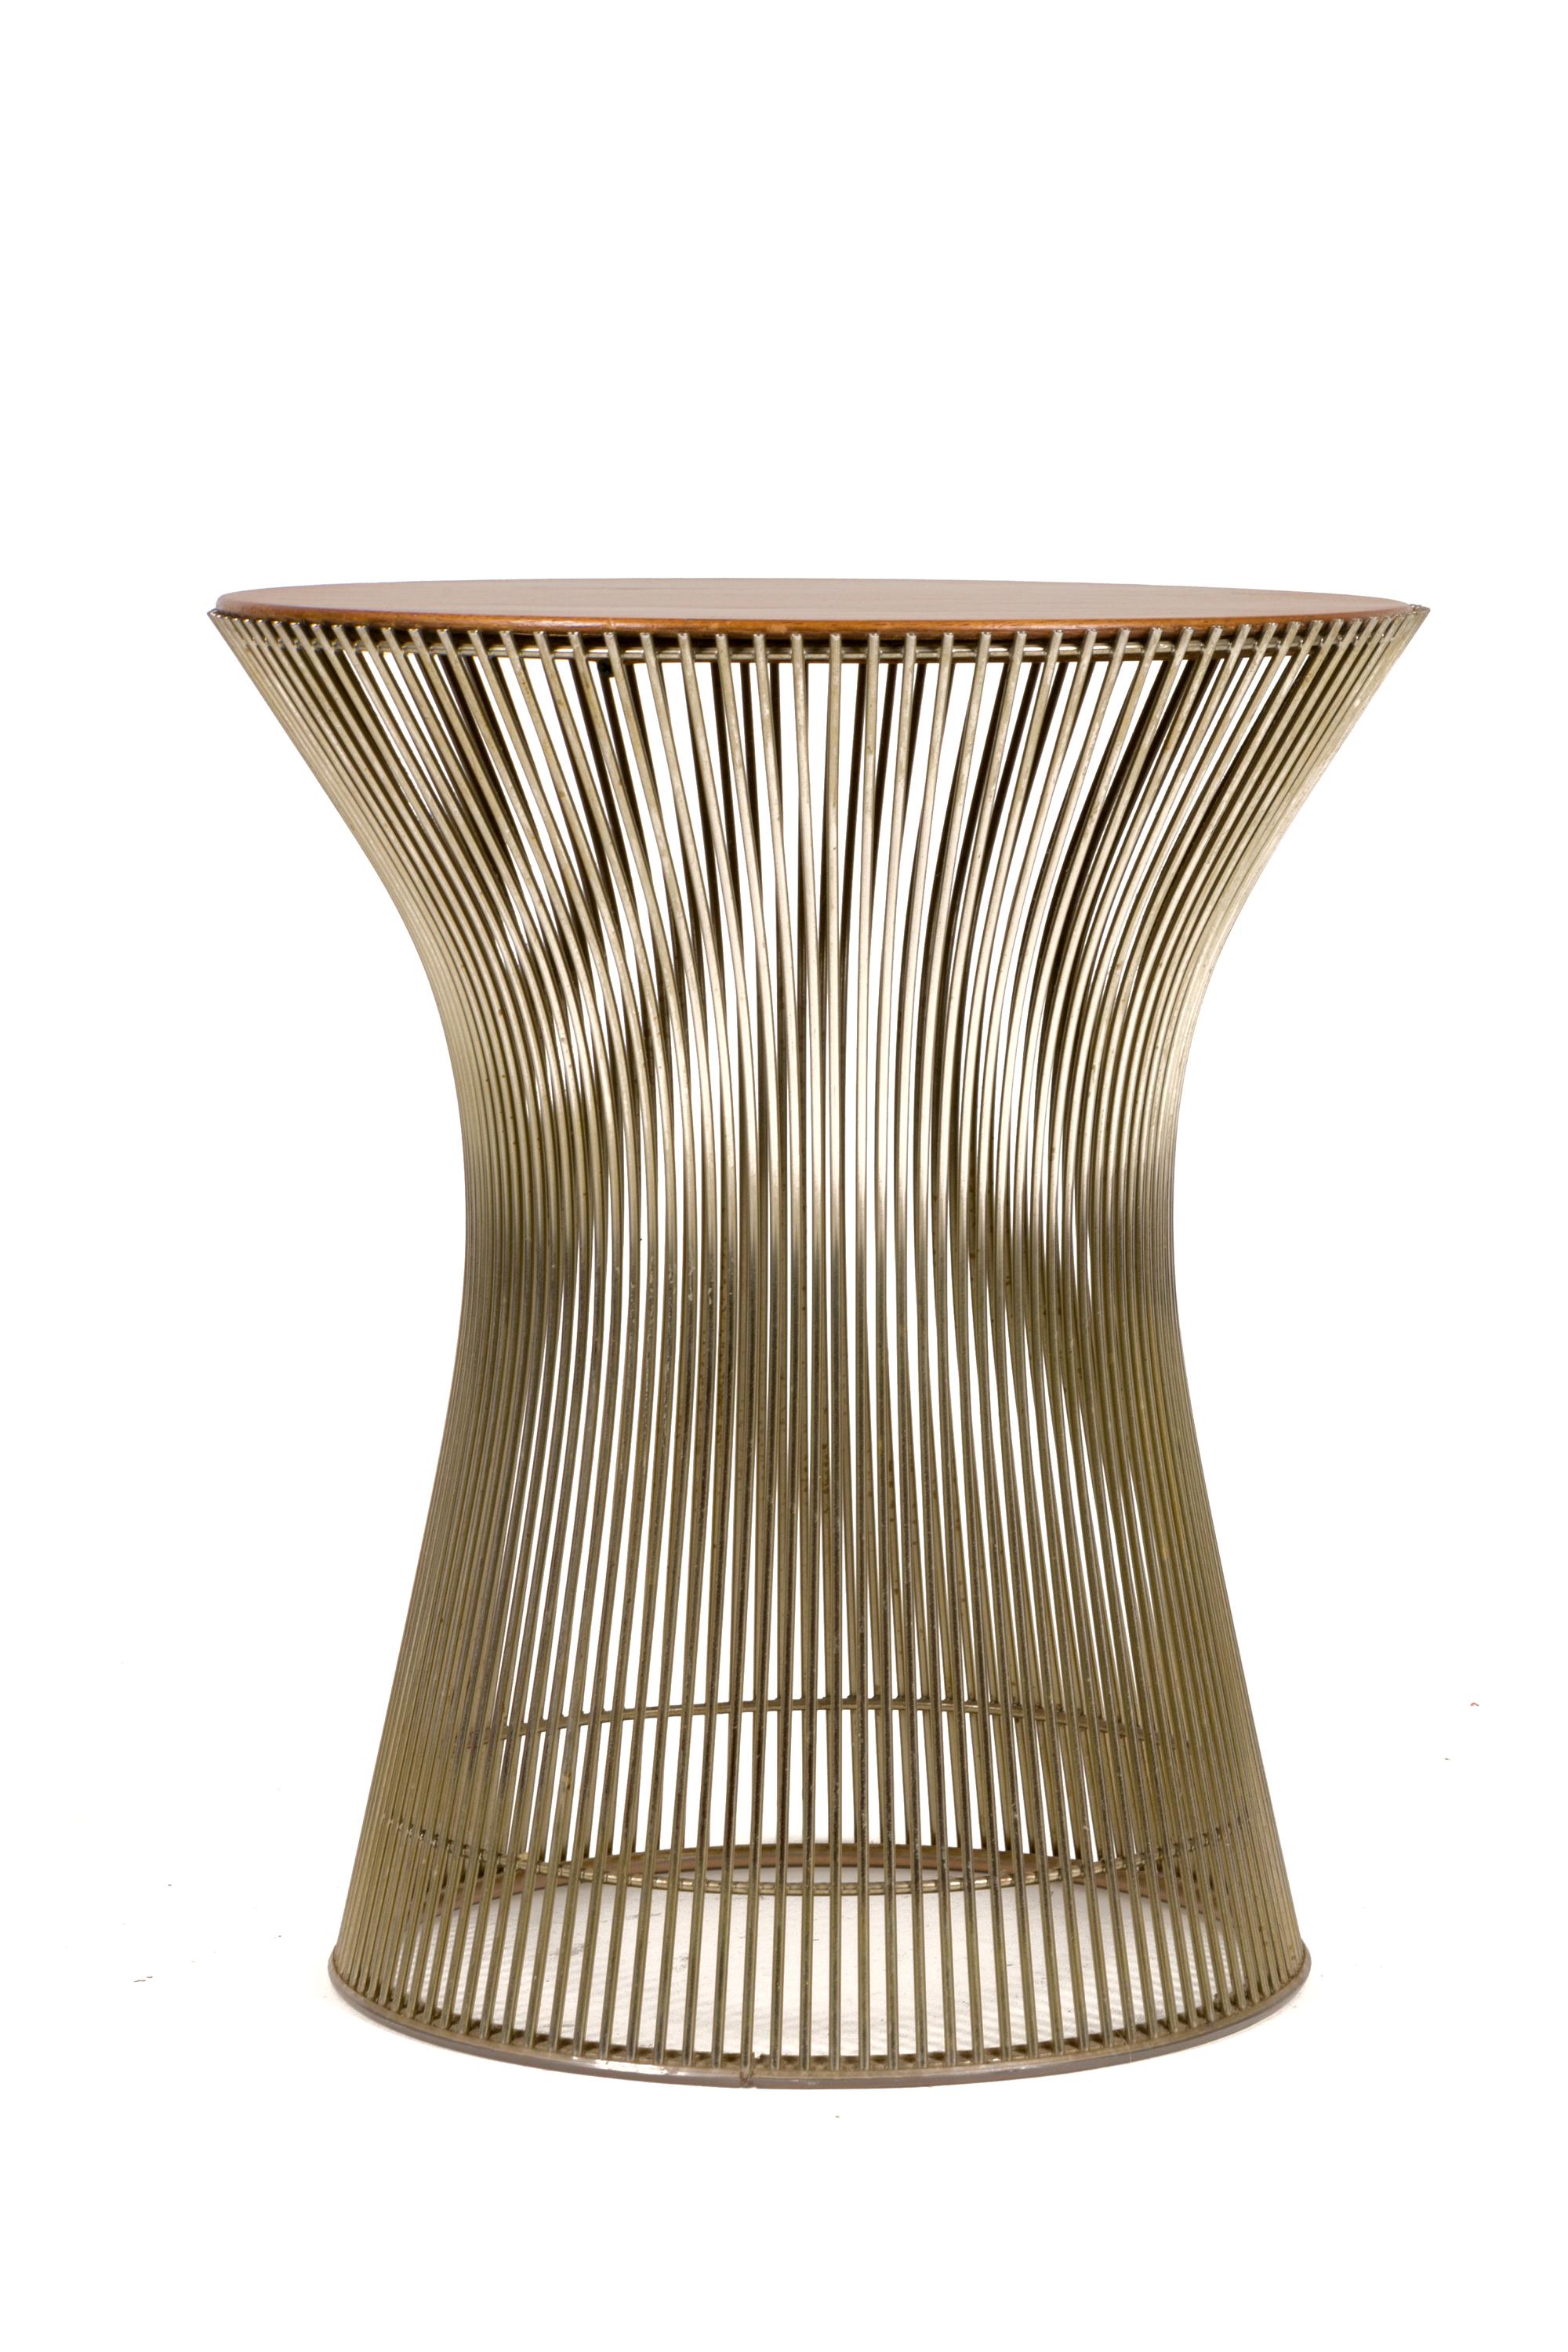 Part of the Platner collection by Knoll in 1962 the side table well demonstrates Platner's Industrial materials married with the graceful organic design. The table is constructed in walnut top and chrome base.